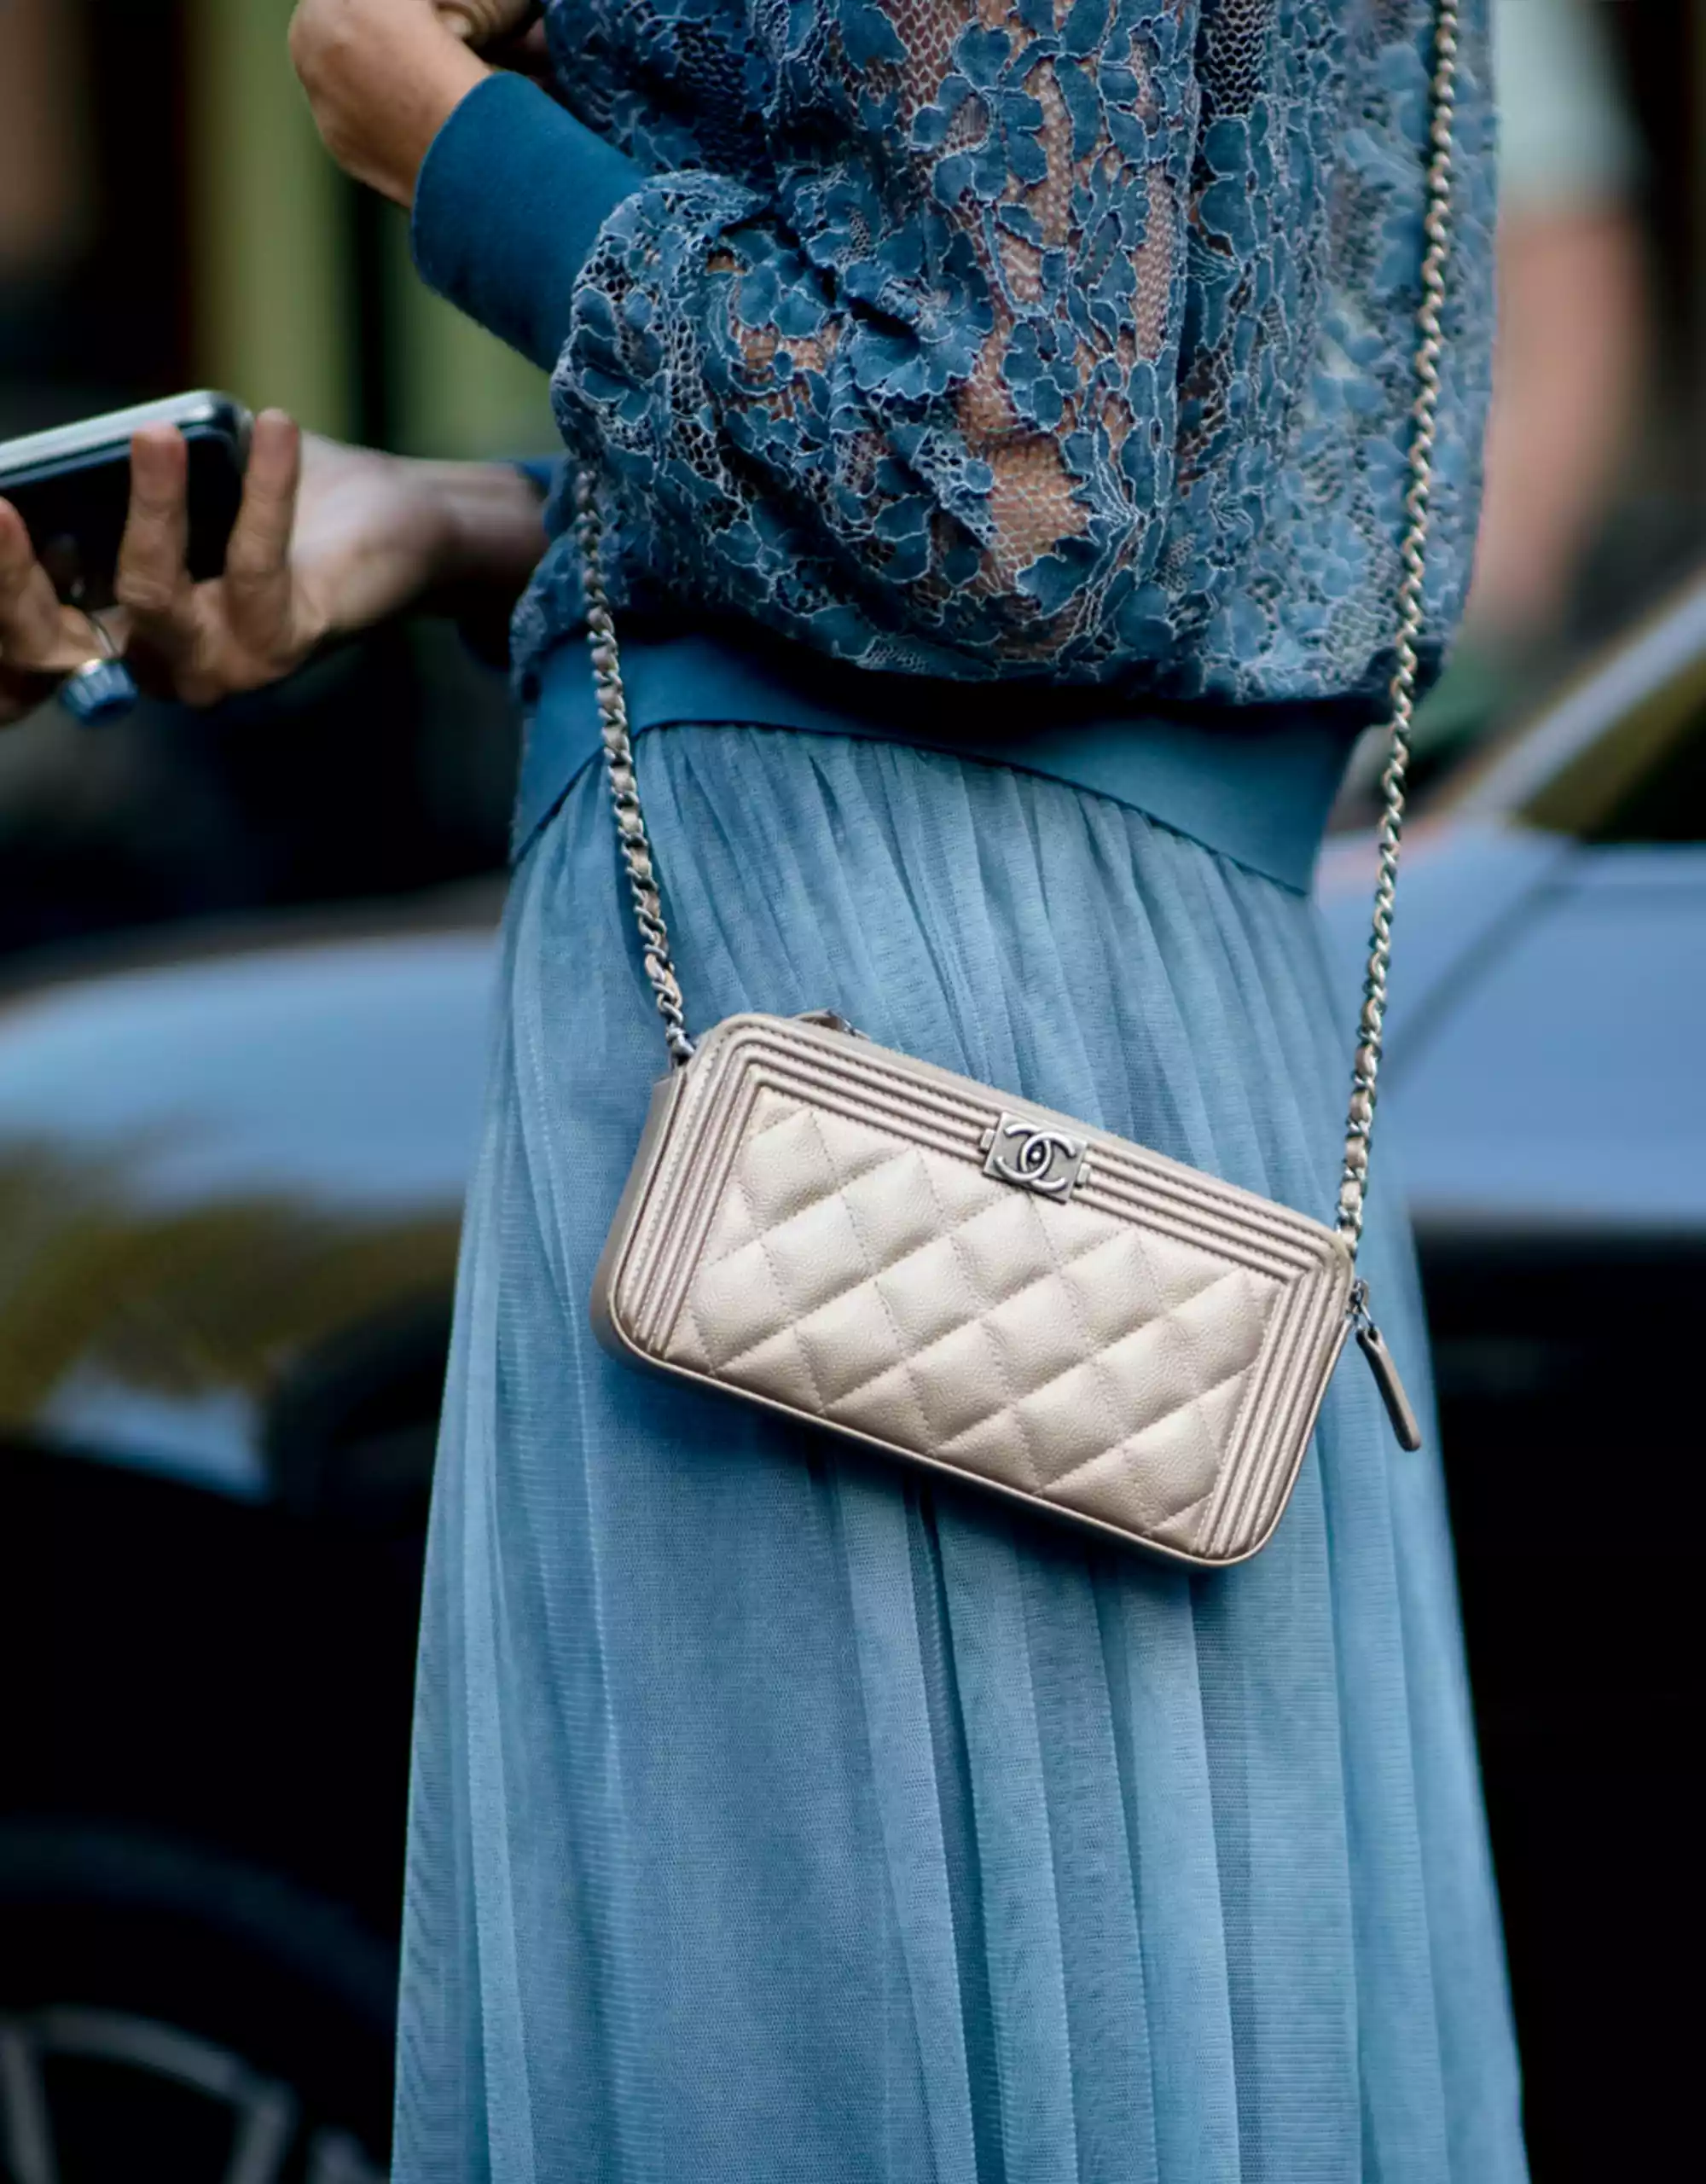 Soar Pengeudlån Ræv All About the Chanel Wallet On Chain Bag | SACLÀB